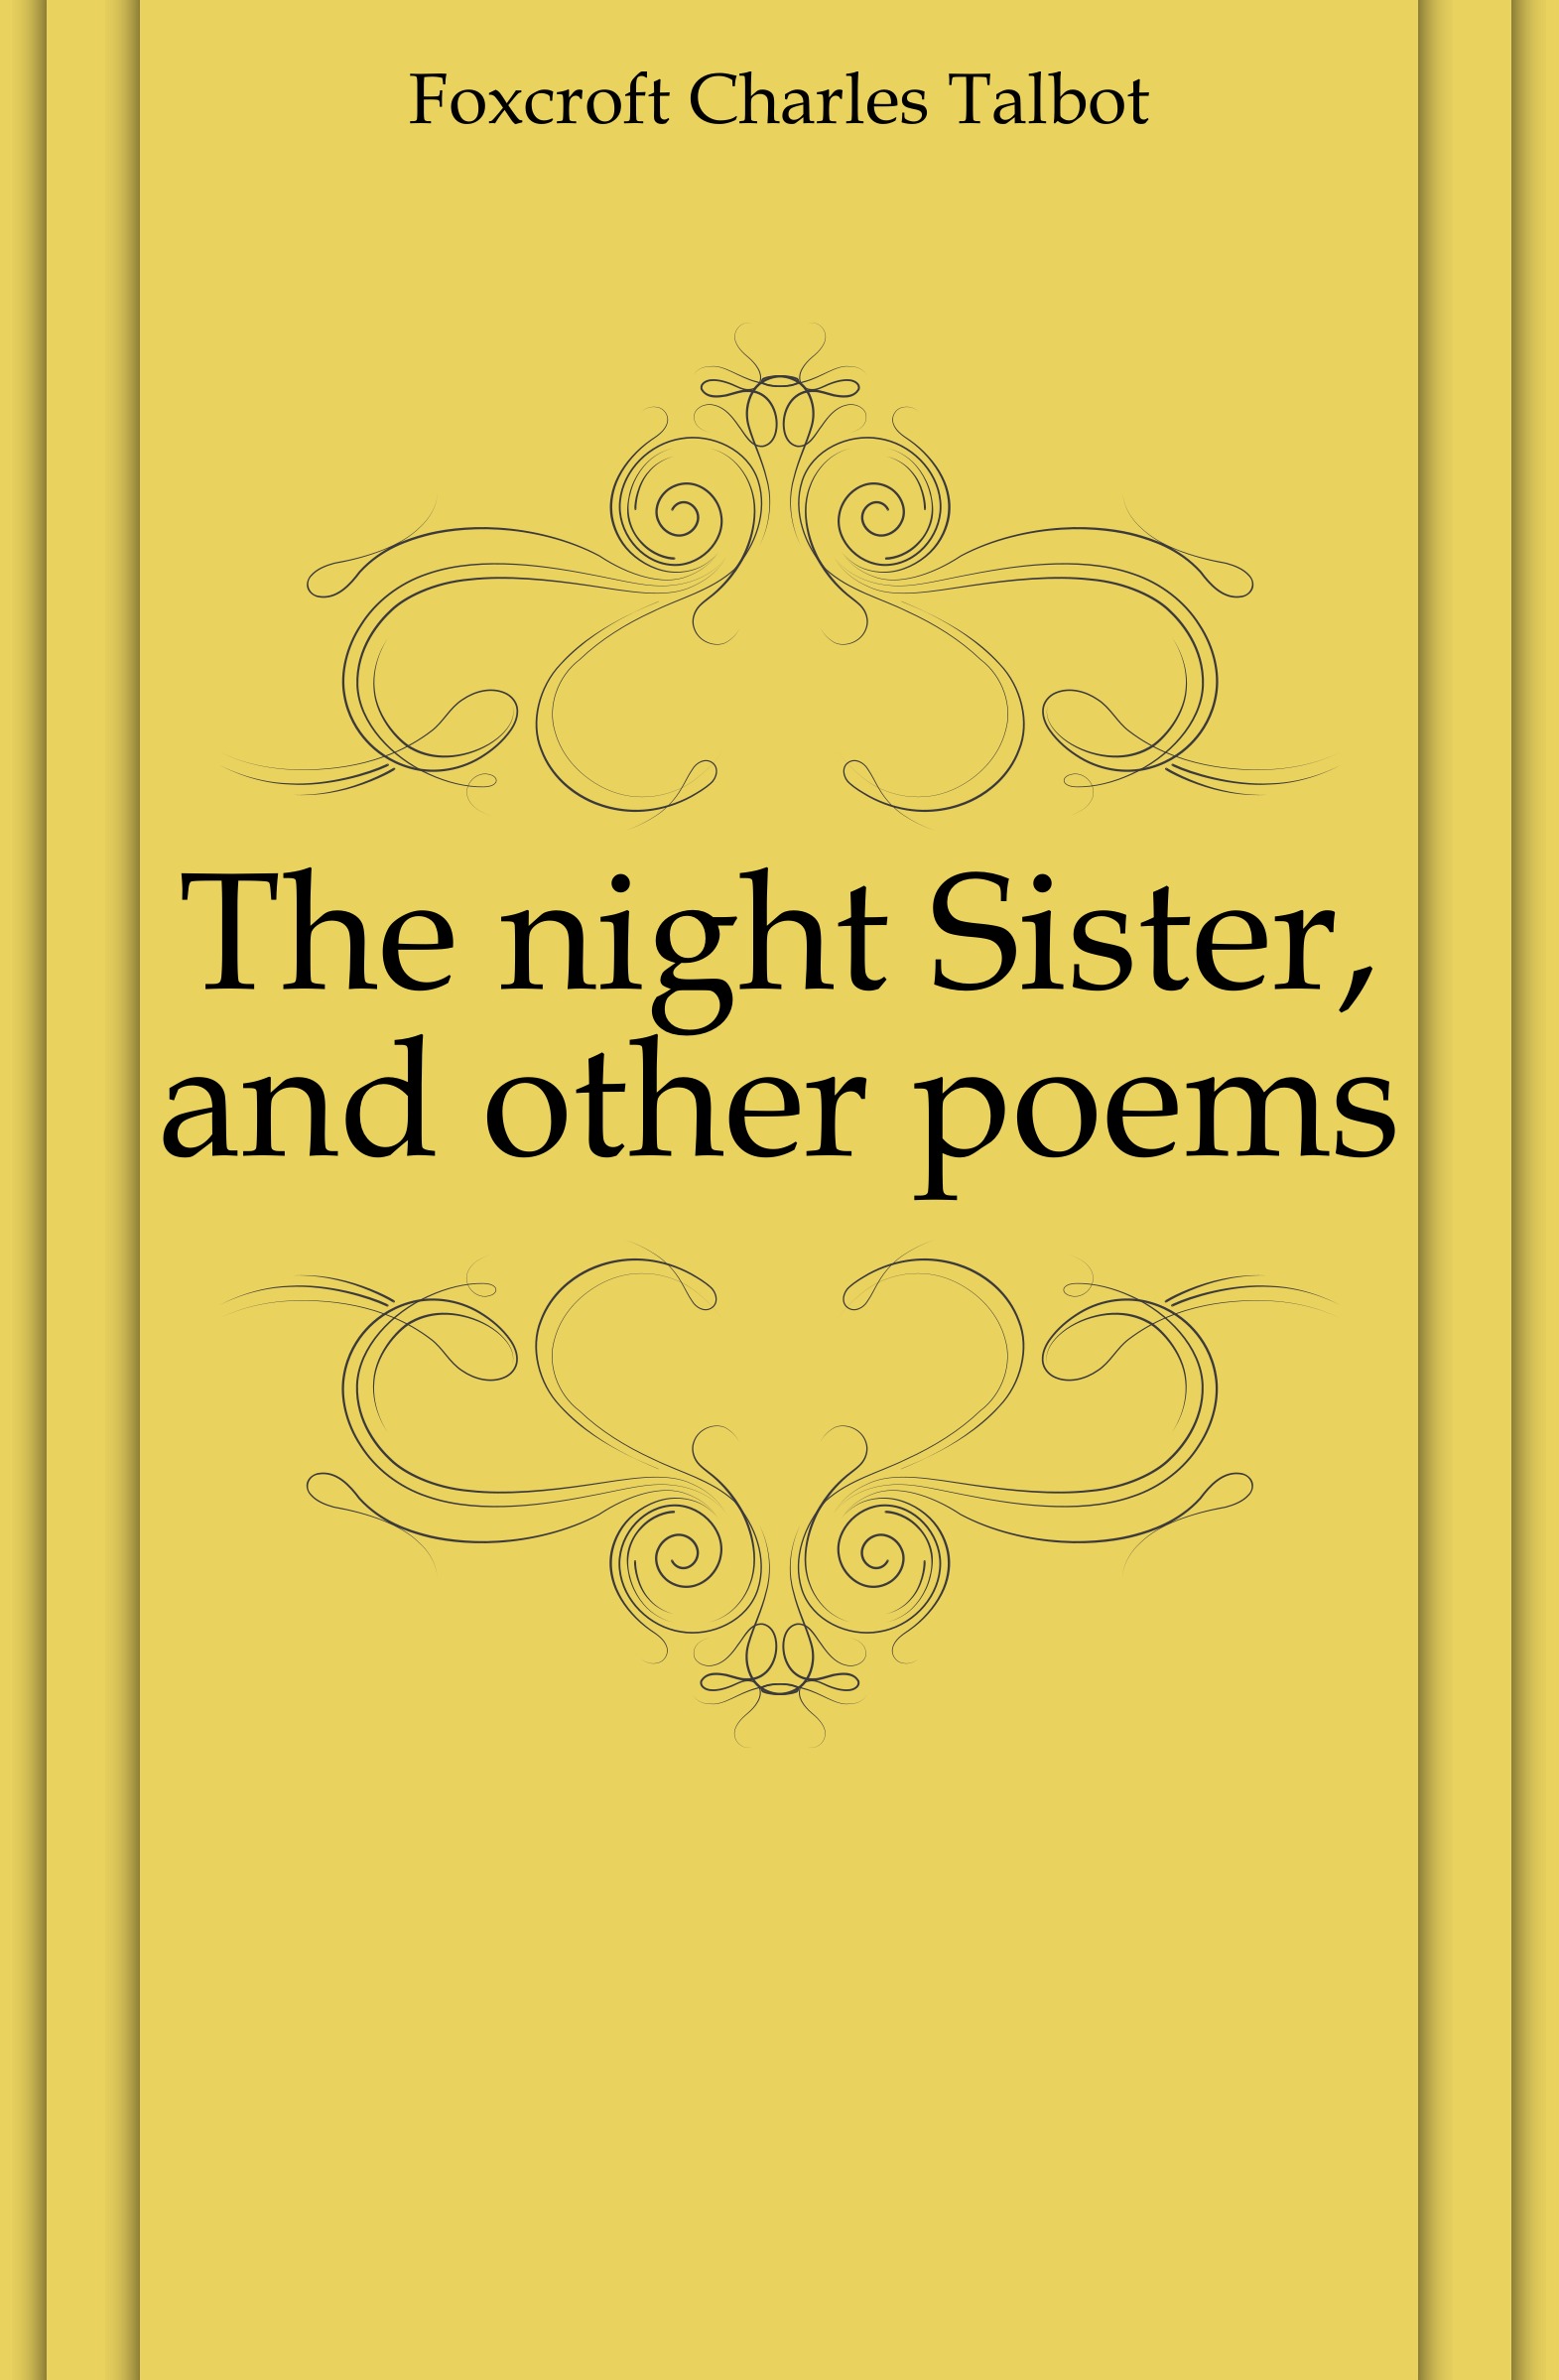 Foxcroft Charles Talbot The night Sister, and other poems